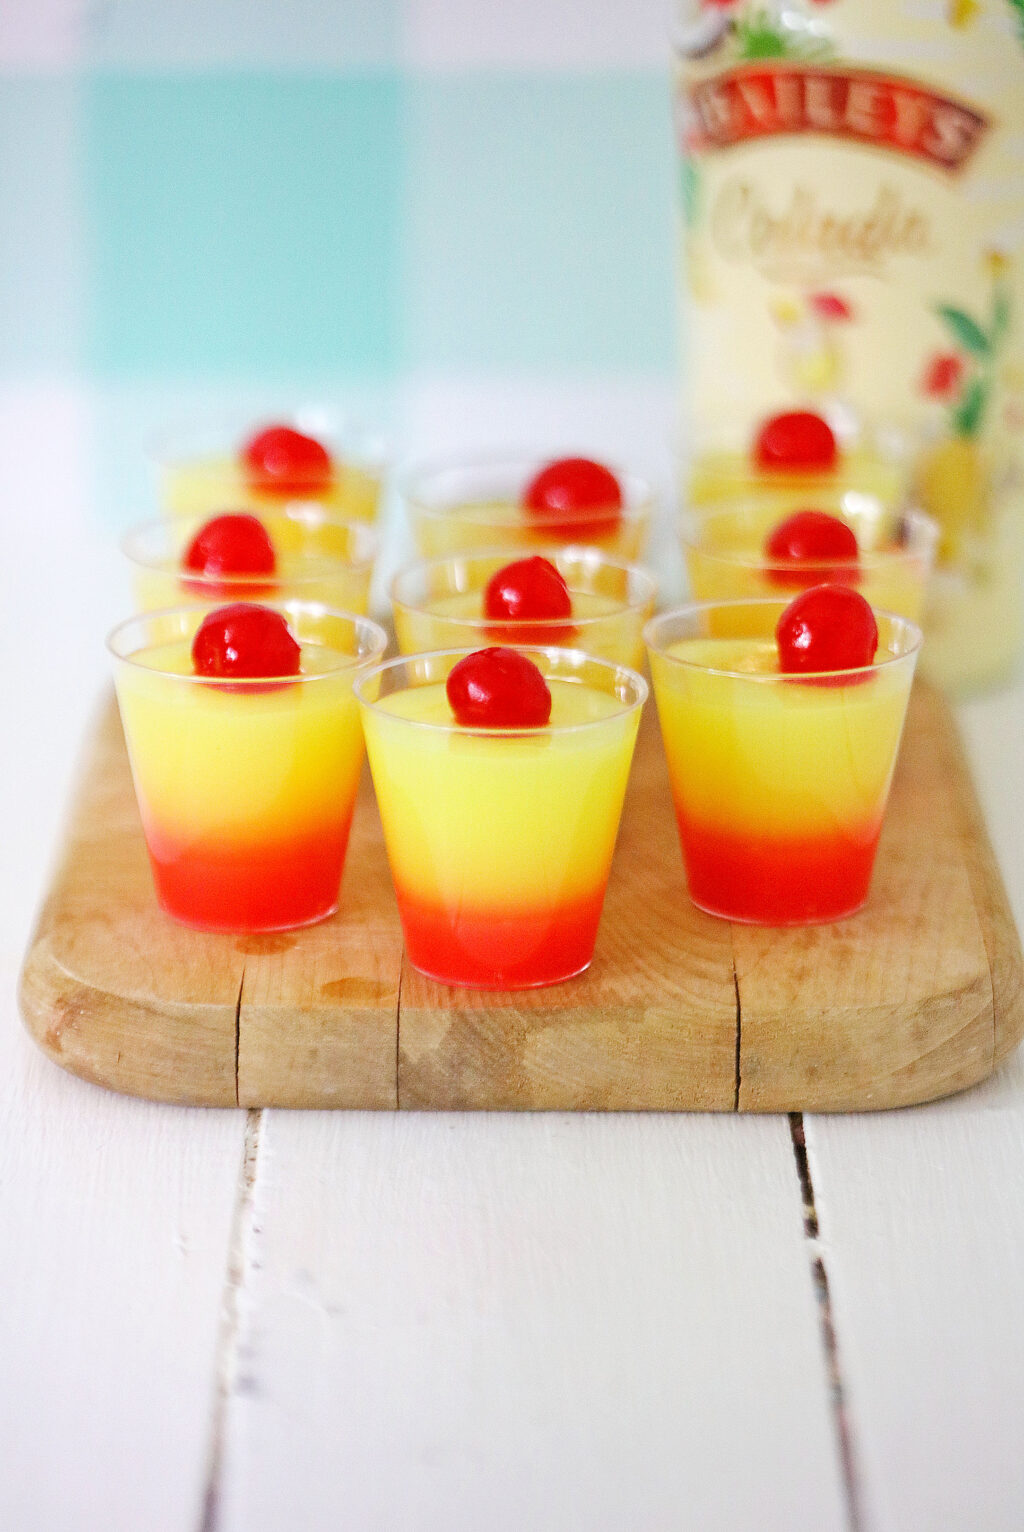 sunrise jello shots made with rum on wood table